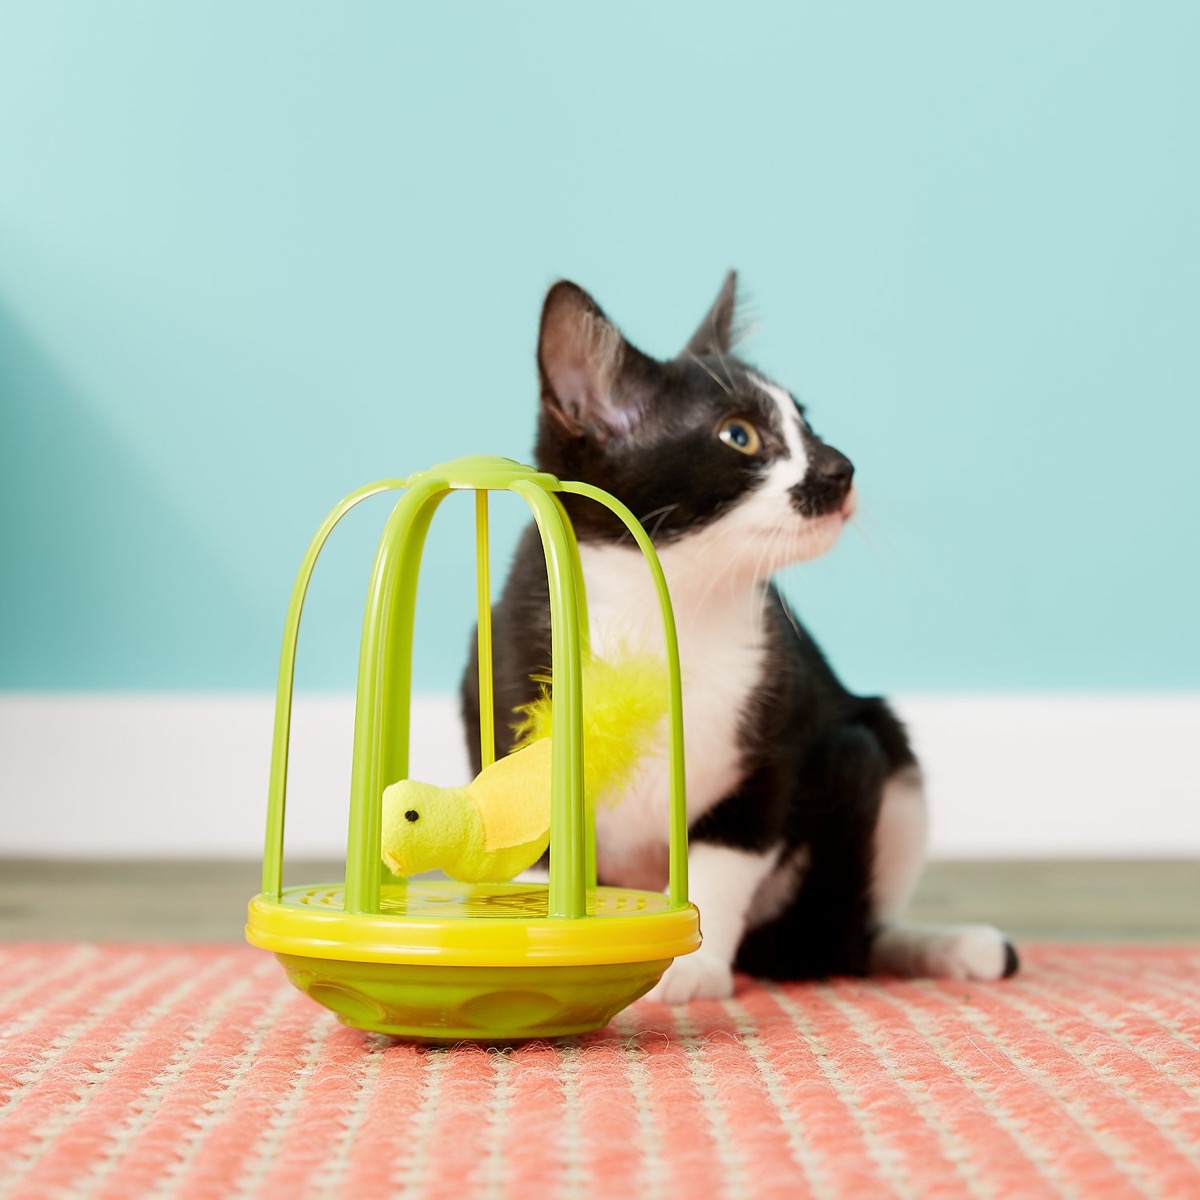 cat and canary toy - cat puns